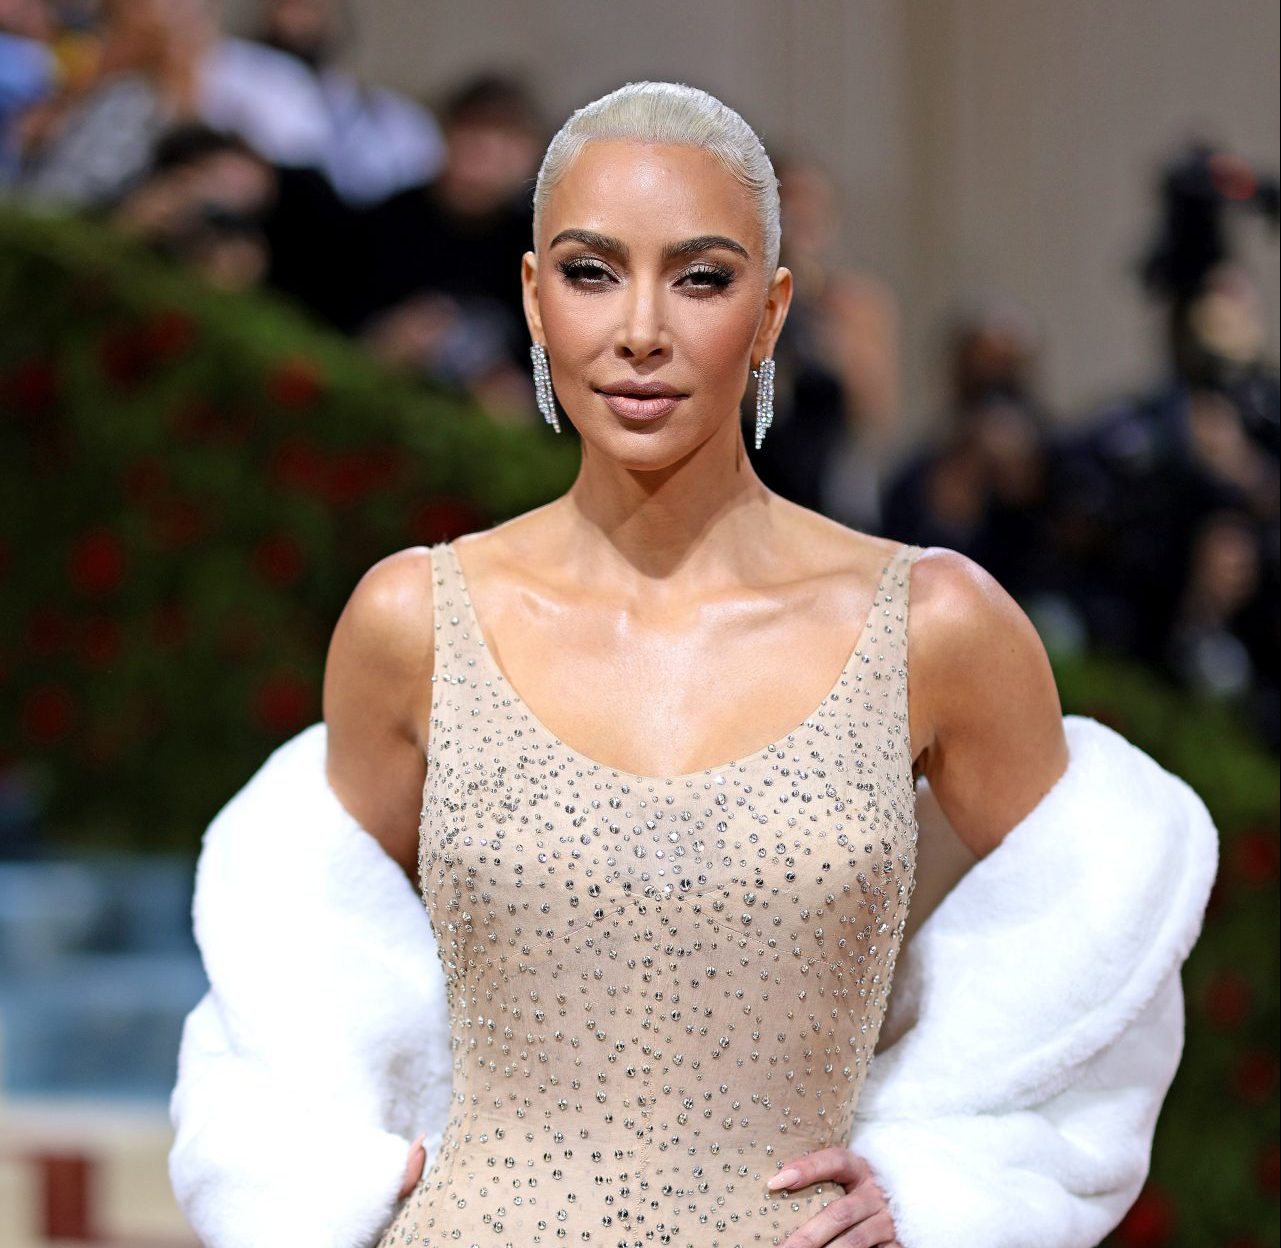 Representatives from the Ripley Museum have spoken out and say that Kim Kardashian did not damage Marilyn Monroe's dress after wearing it to the Met Gala.